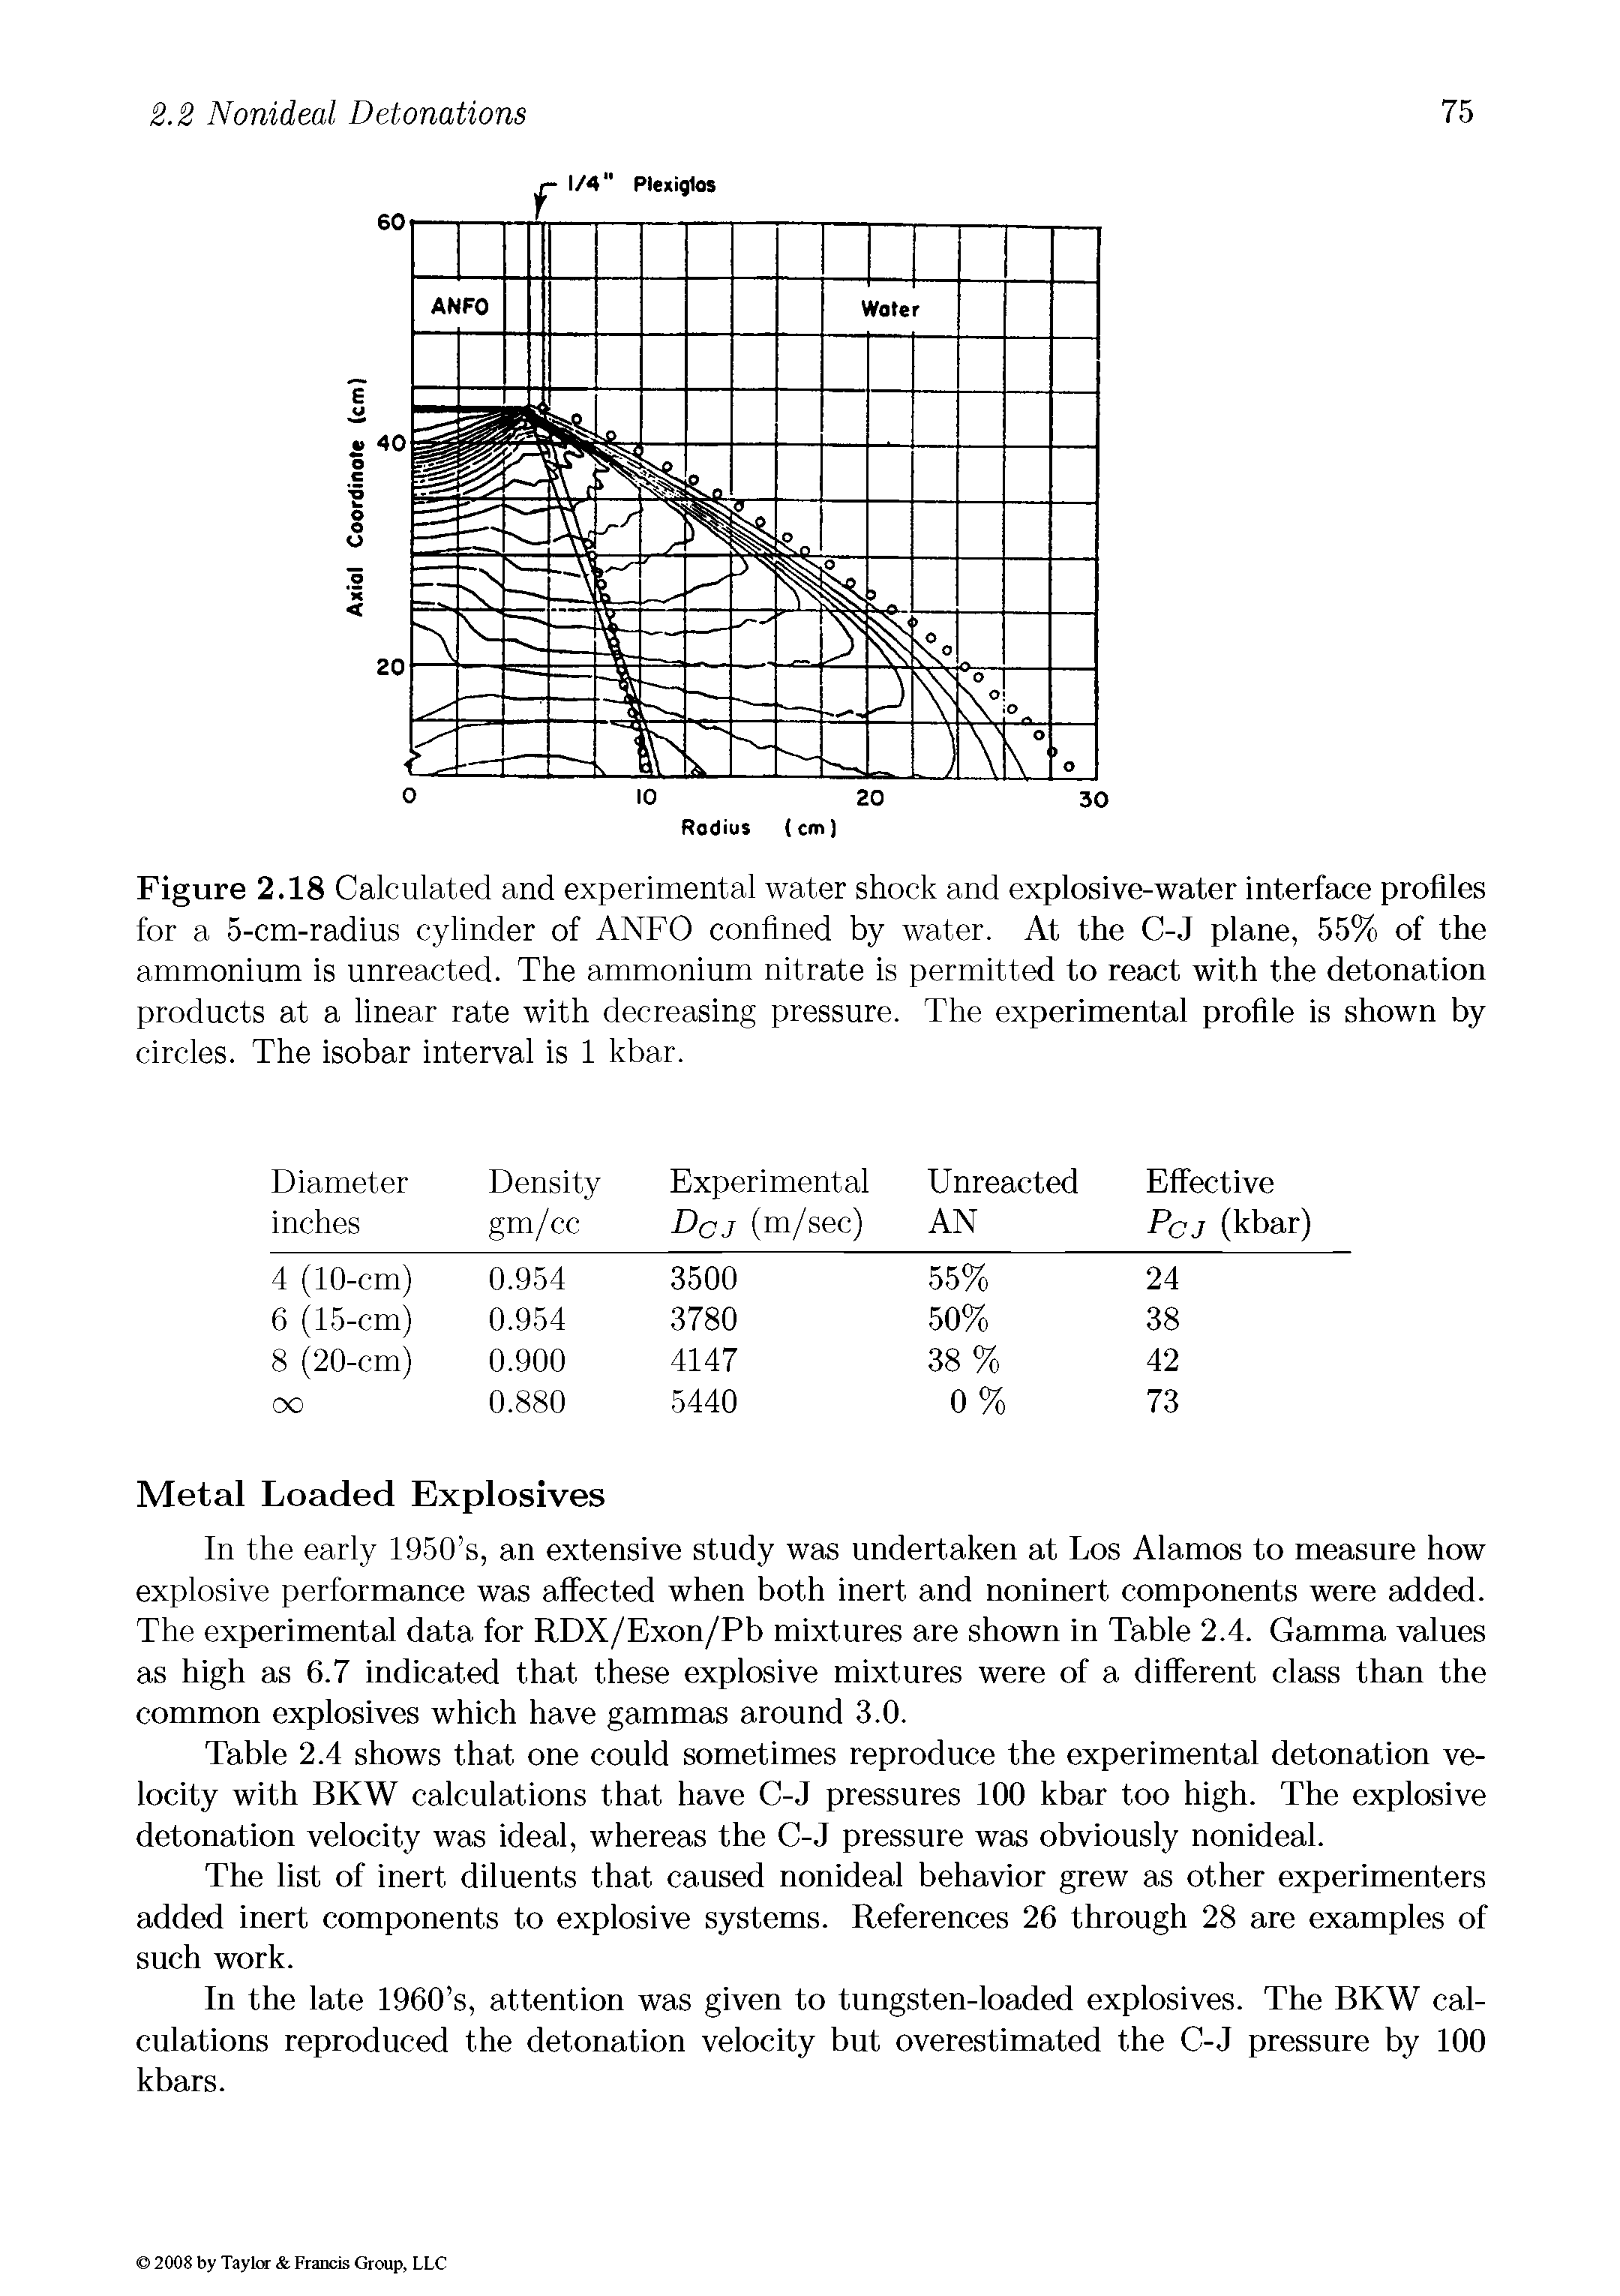 Figure 2.18 Calculated and experimental water shock and explosive-water interface profiles for a 5-cm-radius cylinder of ANFO confined by water. At the C-J plane, 55% of the ammonium is unreacted. The ammonium nitrate is permitted to react with the detonation products at a linear rate with decreasing pressure. The experimental profile is shown by circles. The isobar interval is 1 kbar.